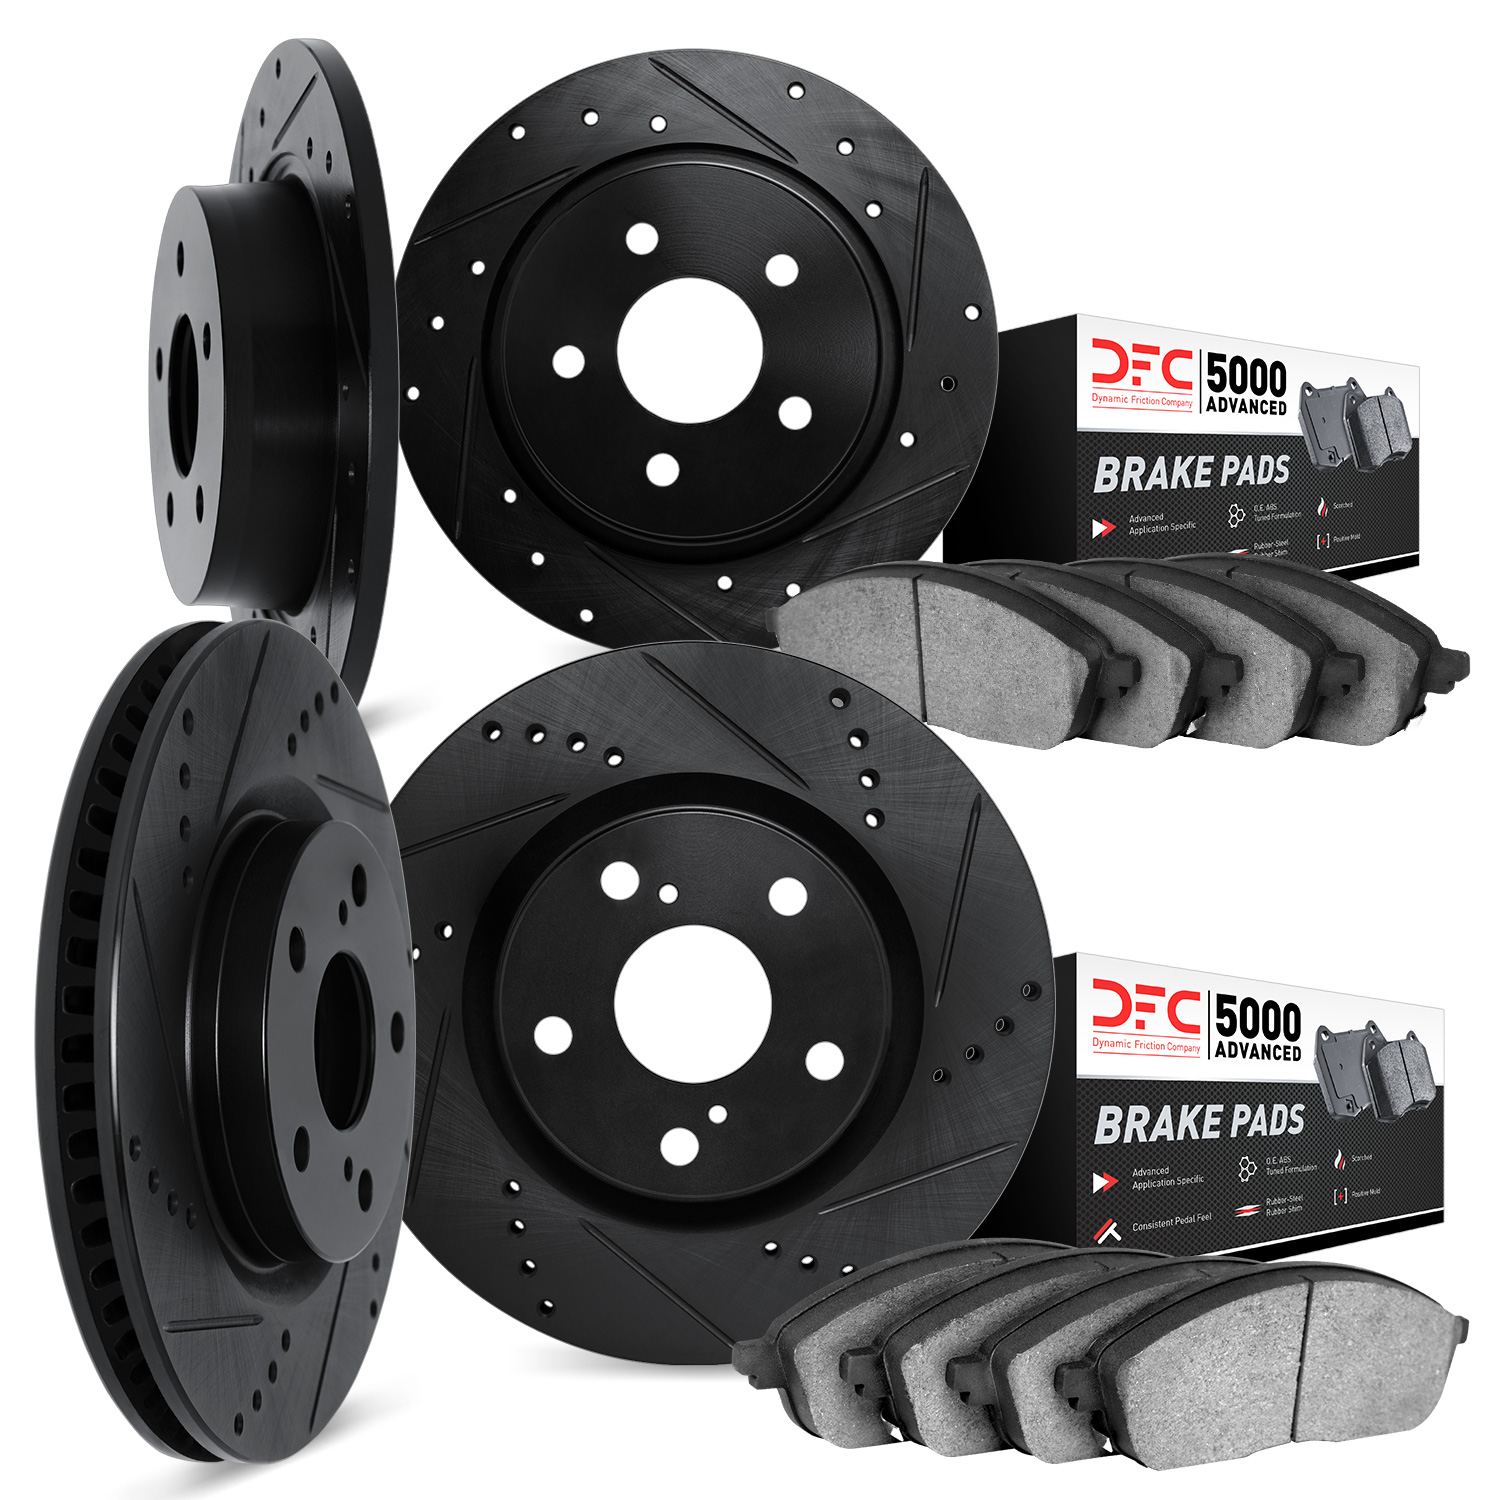 8504-76134 Drilled/Slotted Brake Rotors w/5000 Advanced Brake Pads Kit [Black], 1995-1997 Lexus/Toyota/Scion, Position: Front an